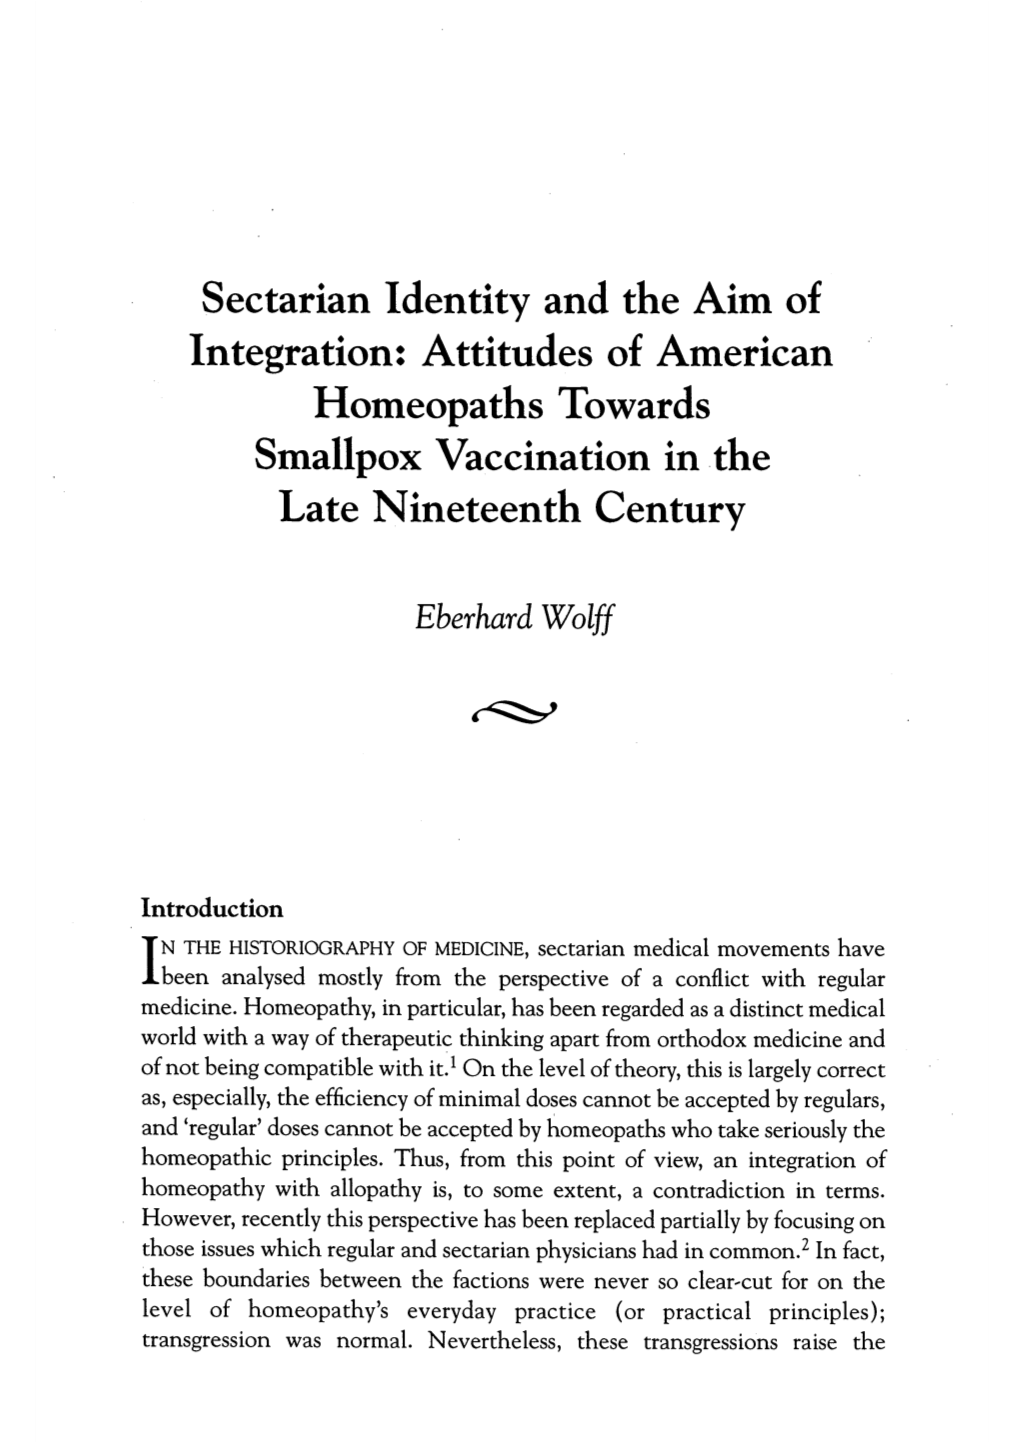 Sectarian Identity and the Aim of Integration: Attitudes of American Homeopaths Towards Smallpox Vaccination in the Late Nineteenth Century